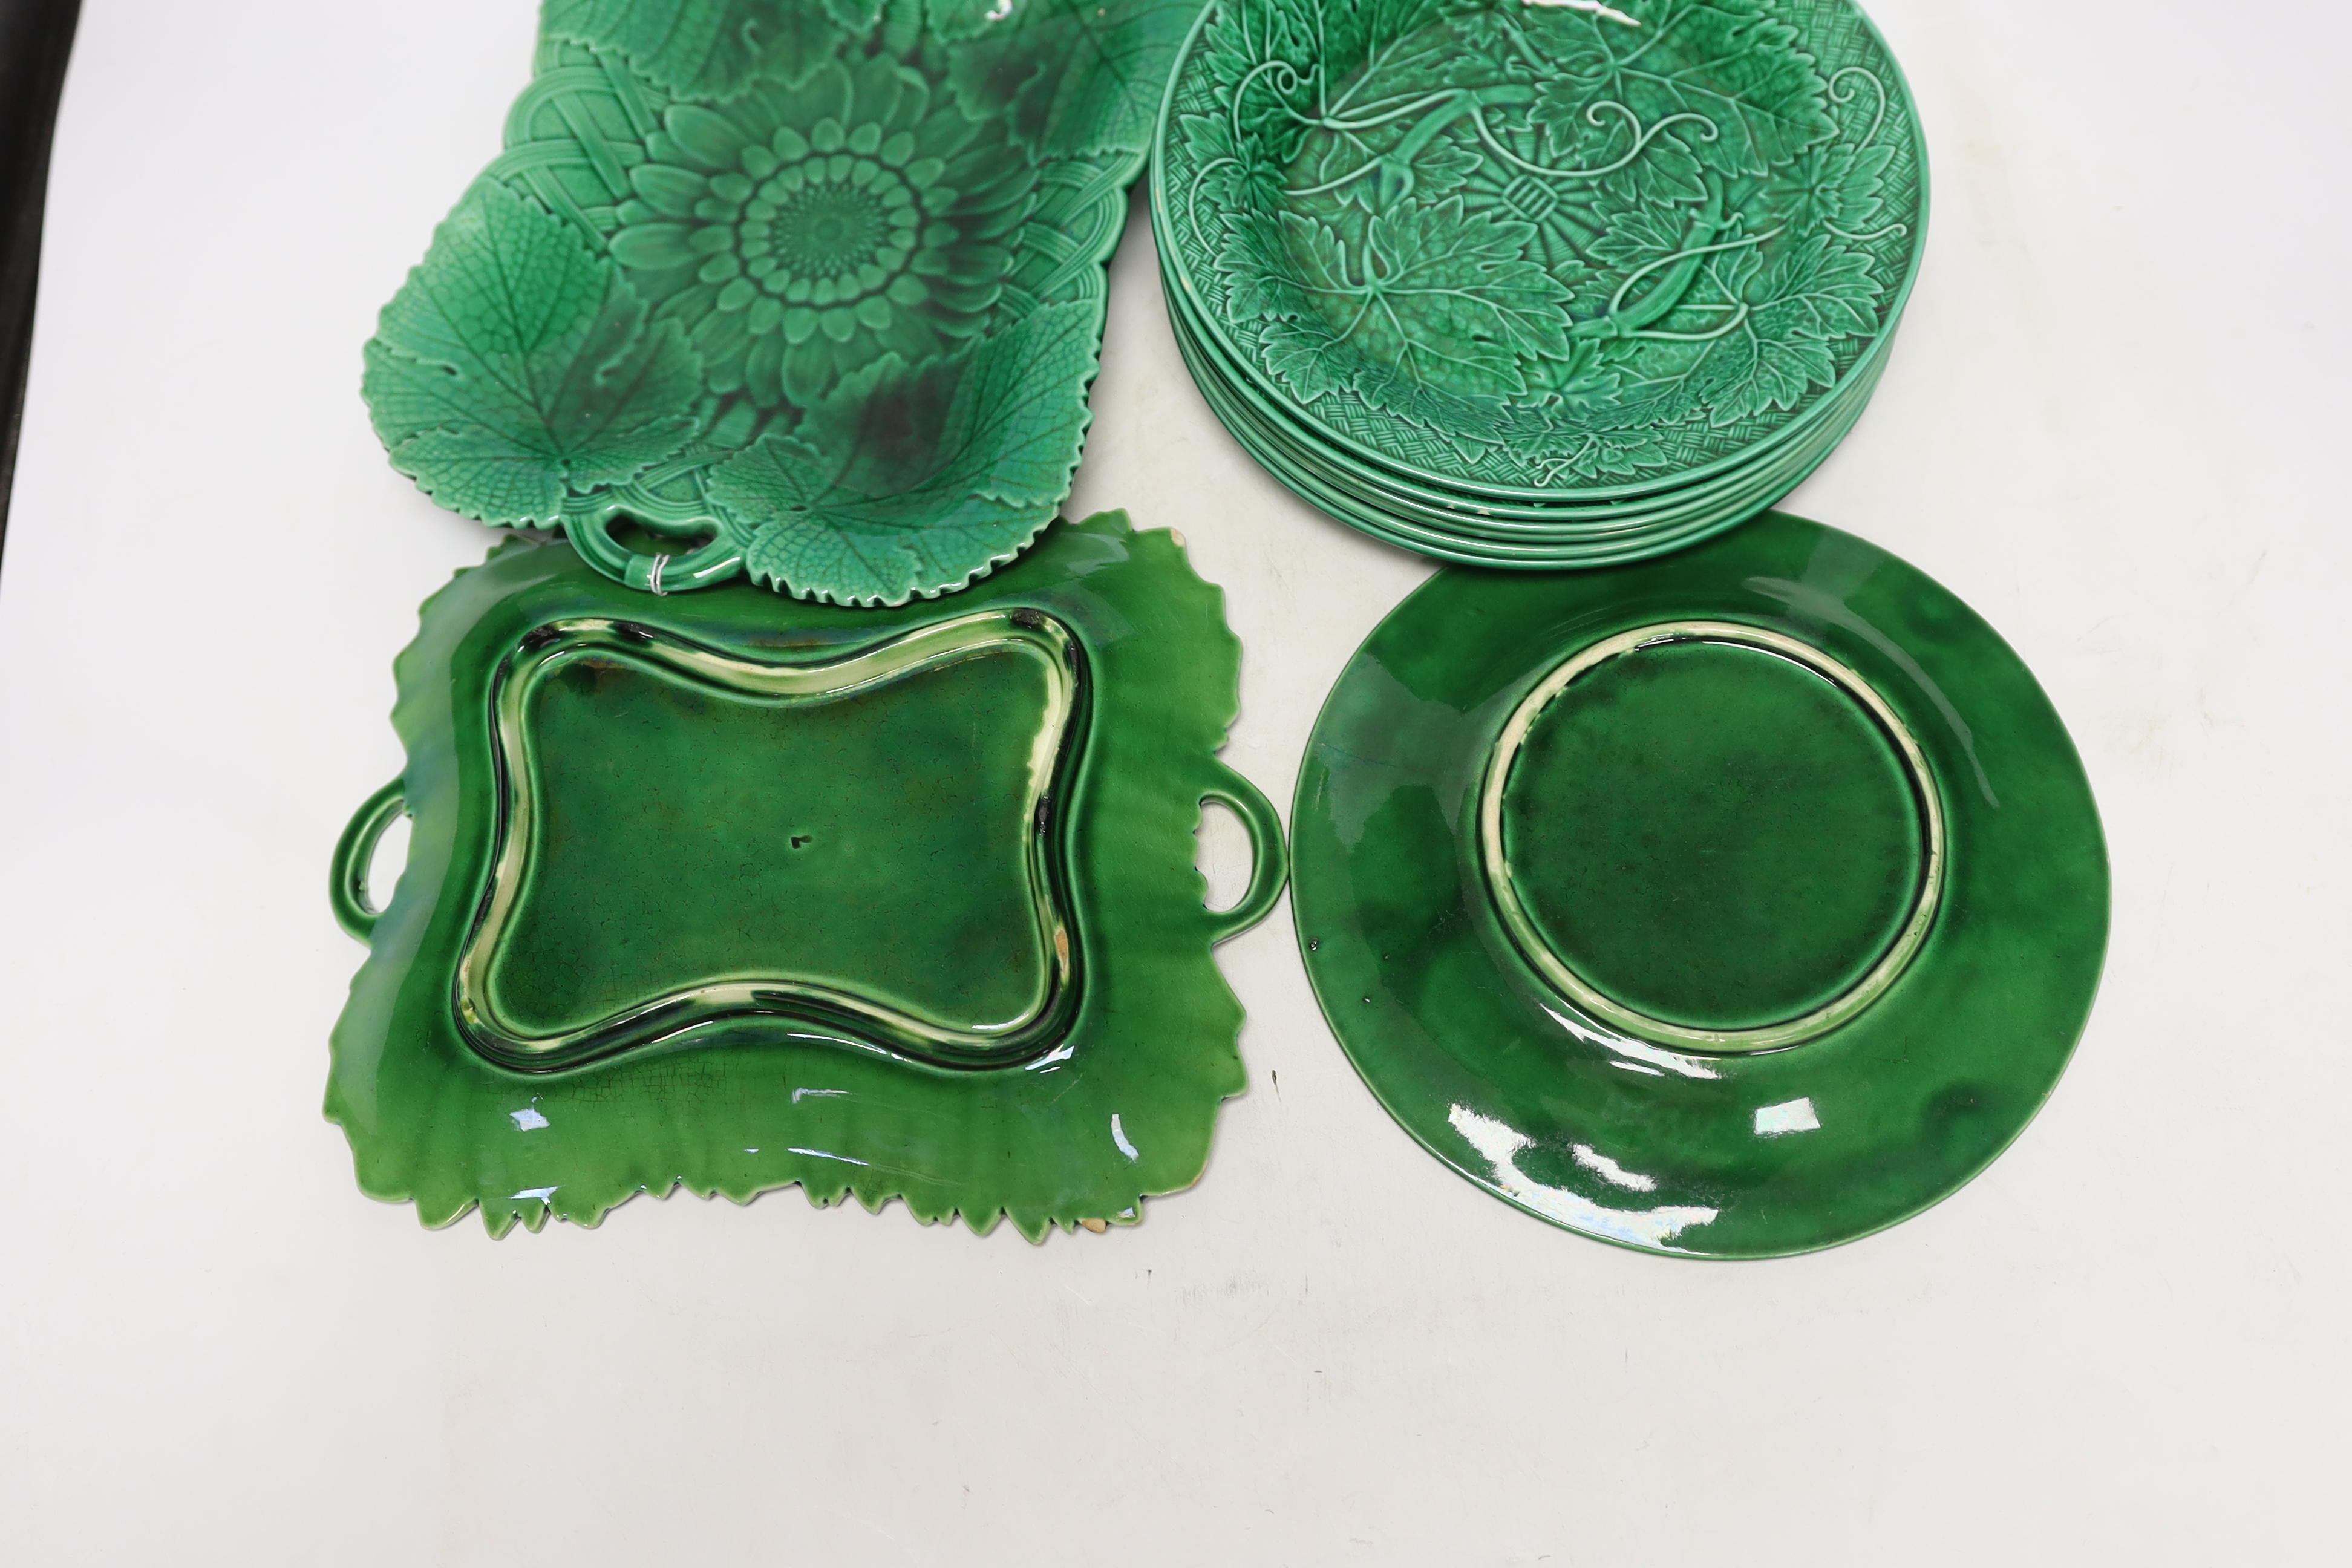 Nine pieces of Victorian cabbage ware green glazed majolica dessert plates and dishes, mostly Wedgwood